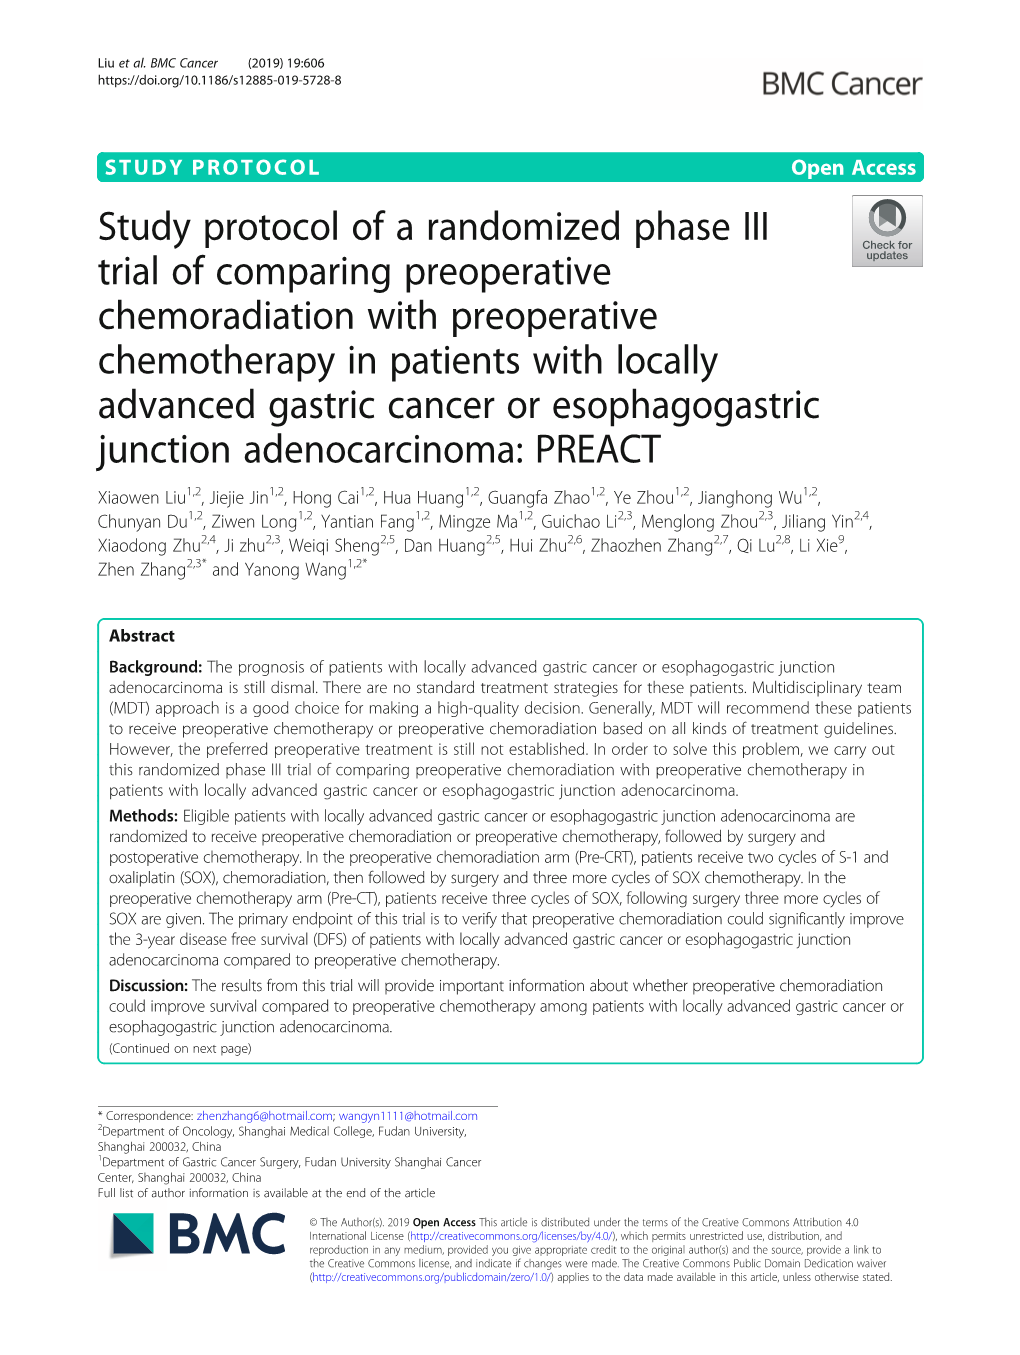 Study Protocol of a Randomized Phase III Trial of Comparing Preoperative